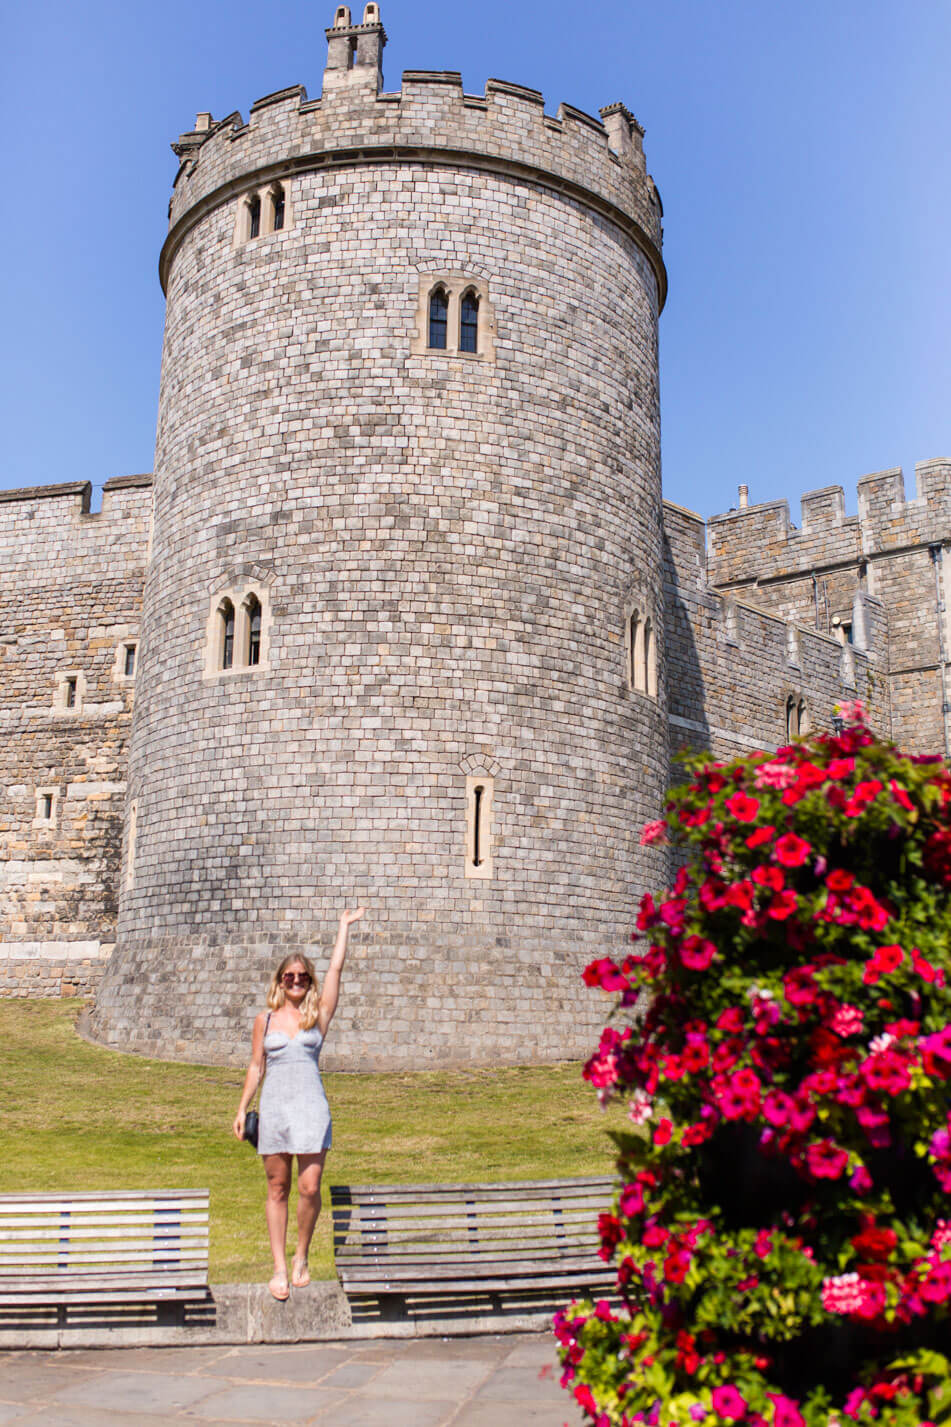 A day trip from London to Windsor Castle